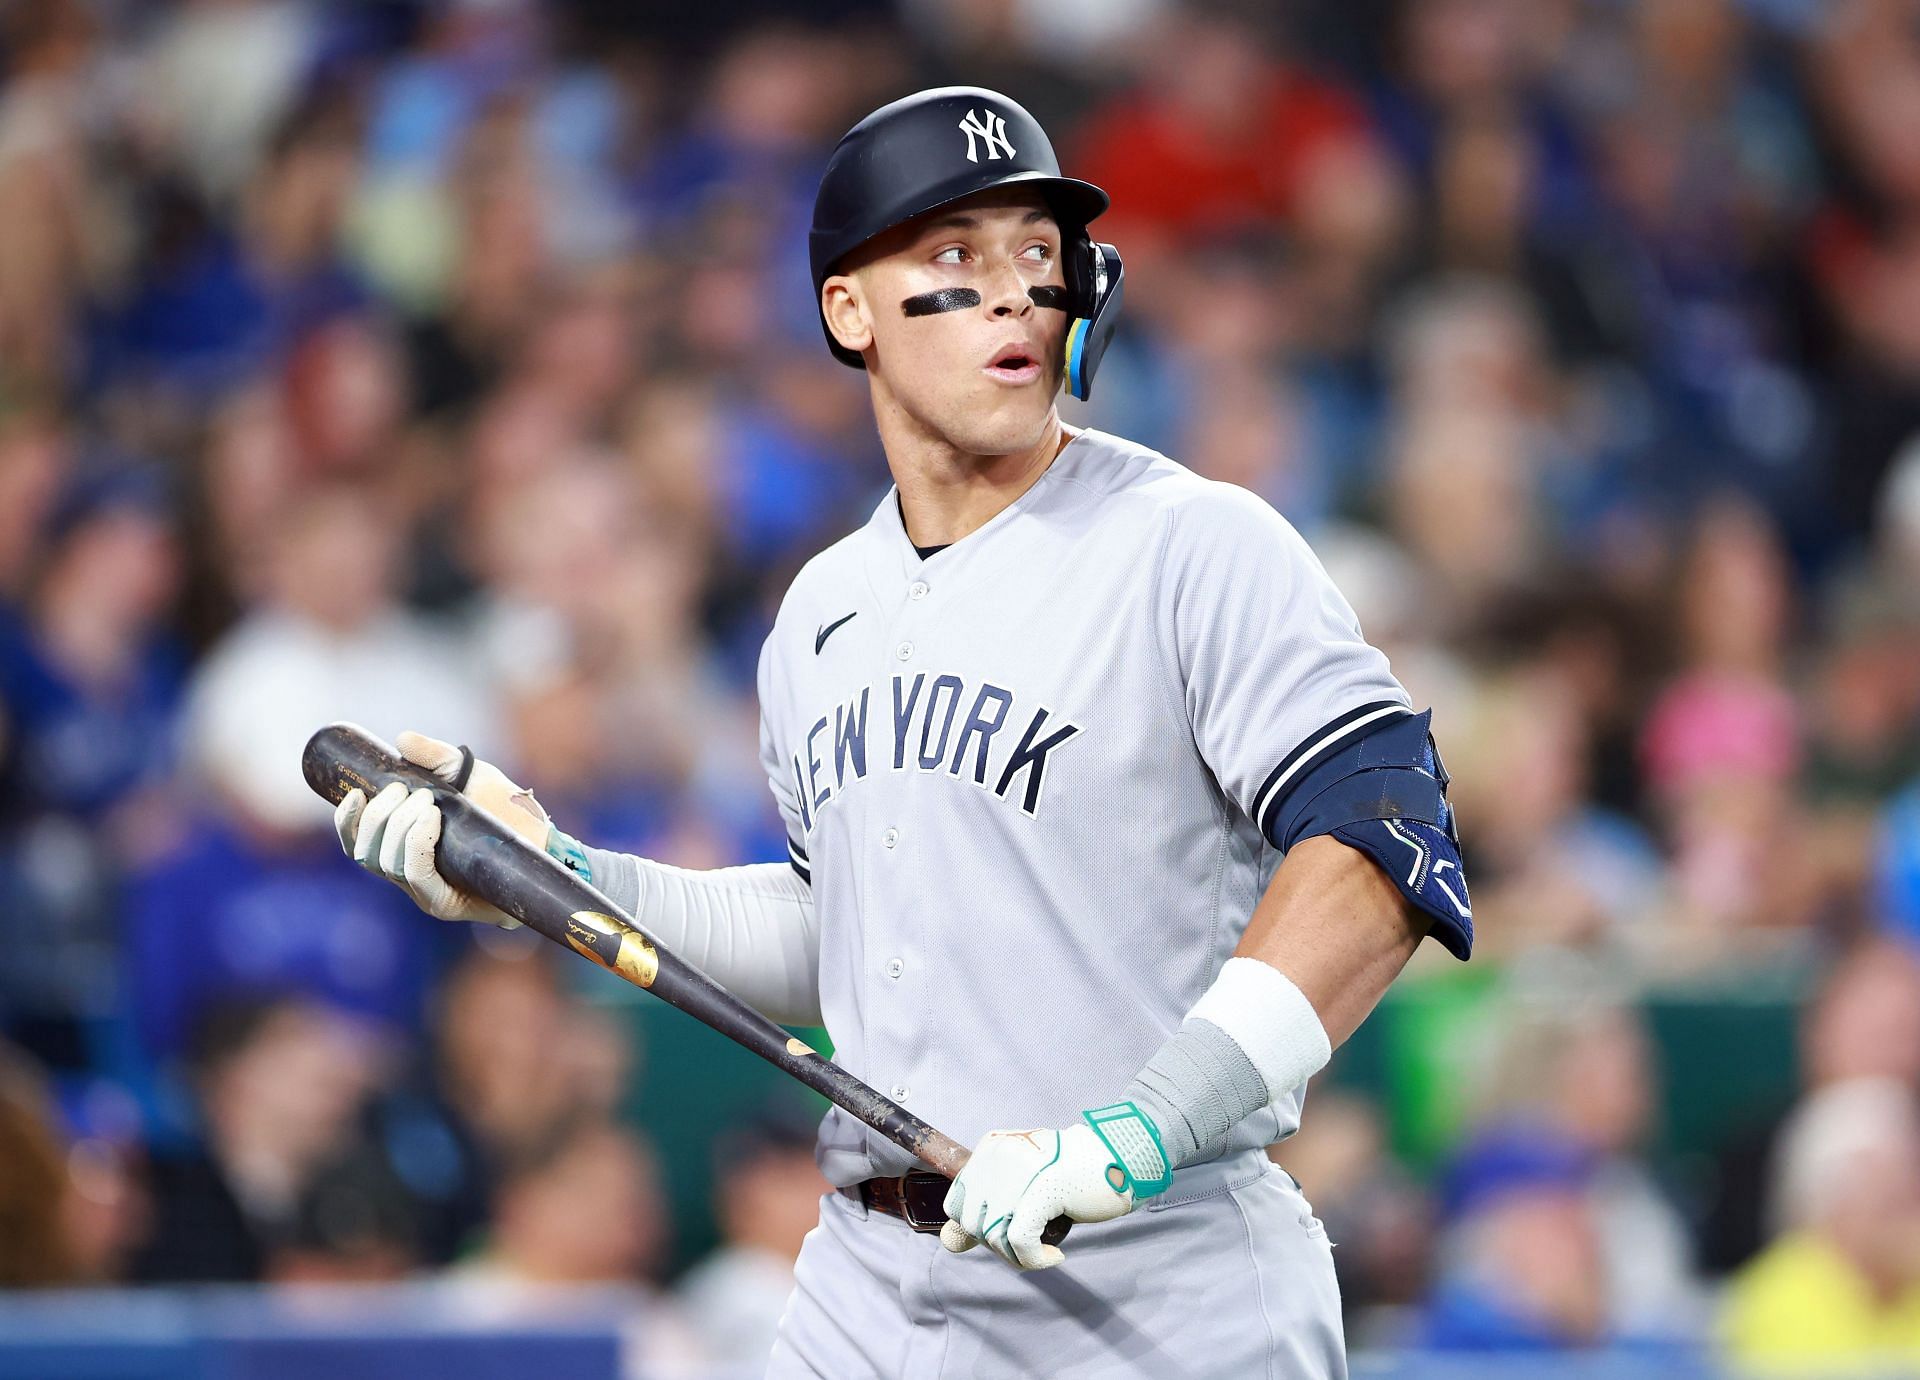 Aaron Judge, His Bat Dulled, Makes Brilliant Catch in Yankees Win